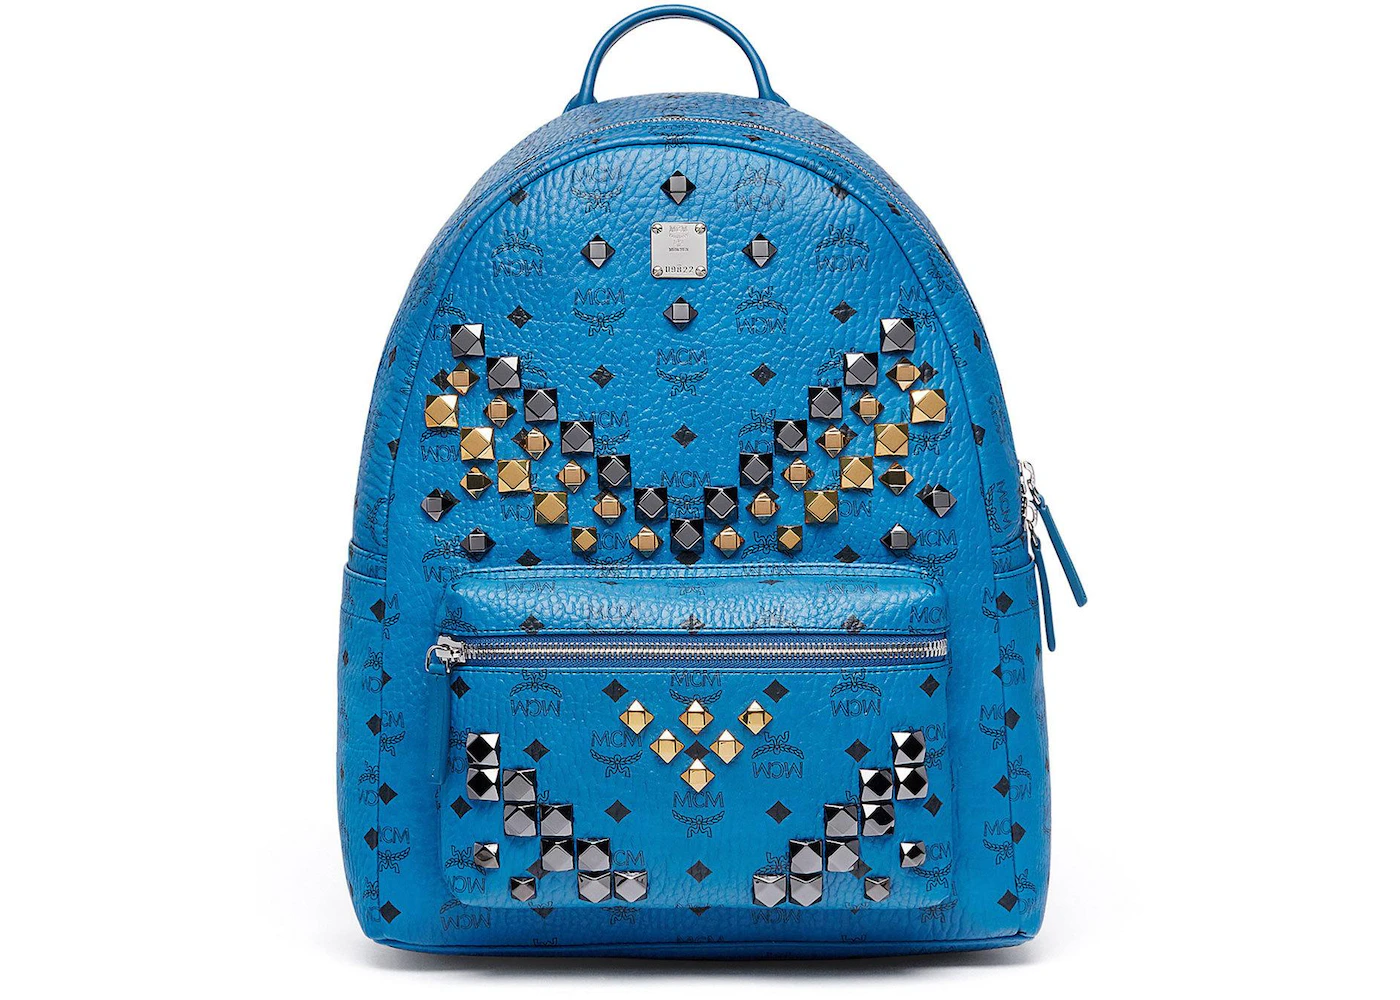 MCM Stark Backpack Stud Medium Munich Blue in Coated Canvas with